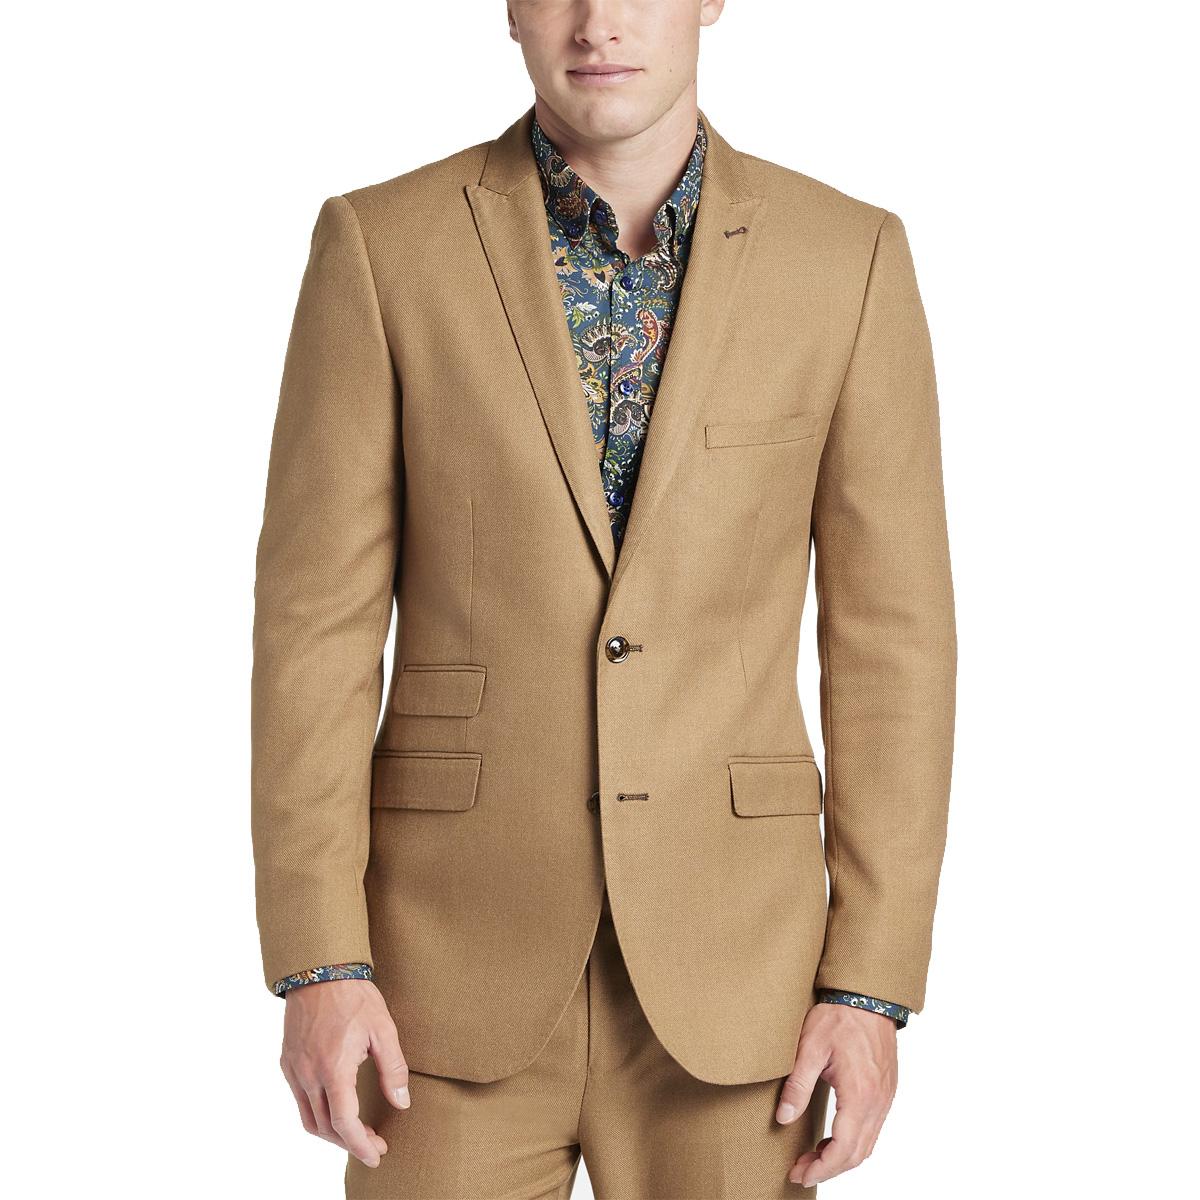 Paisley and Gray Slim Fit Peak Lapel Suit Jacket for $29.99 Shipped